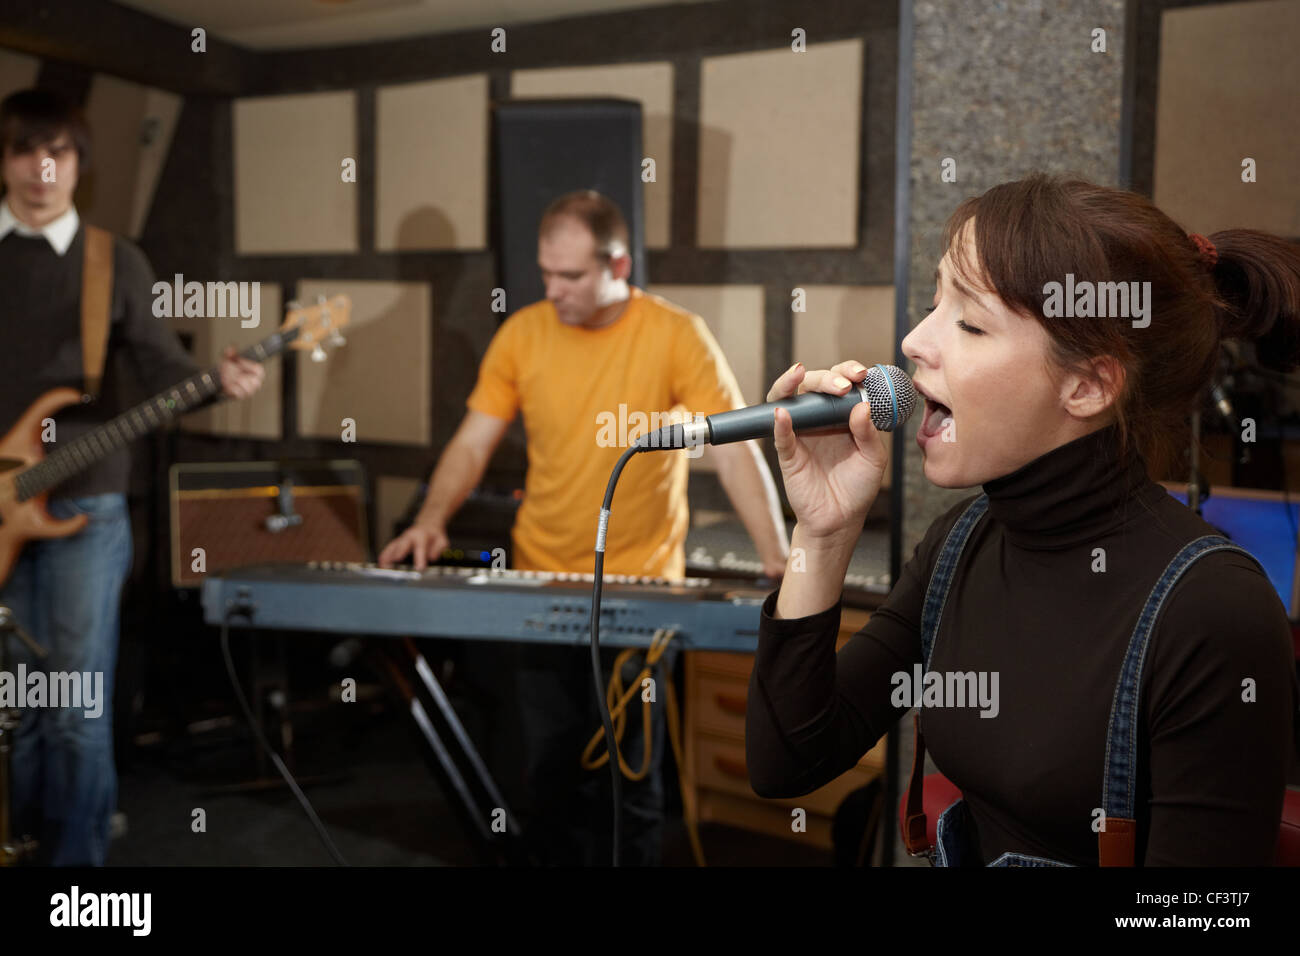 vocalist girl is singing. electro guitar player and keyboarder in out of focus Stock Photo